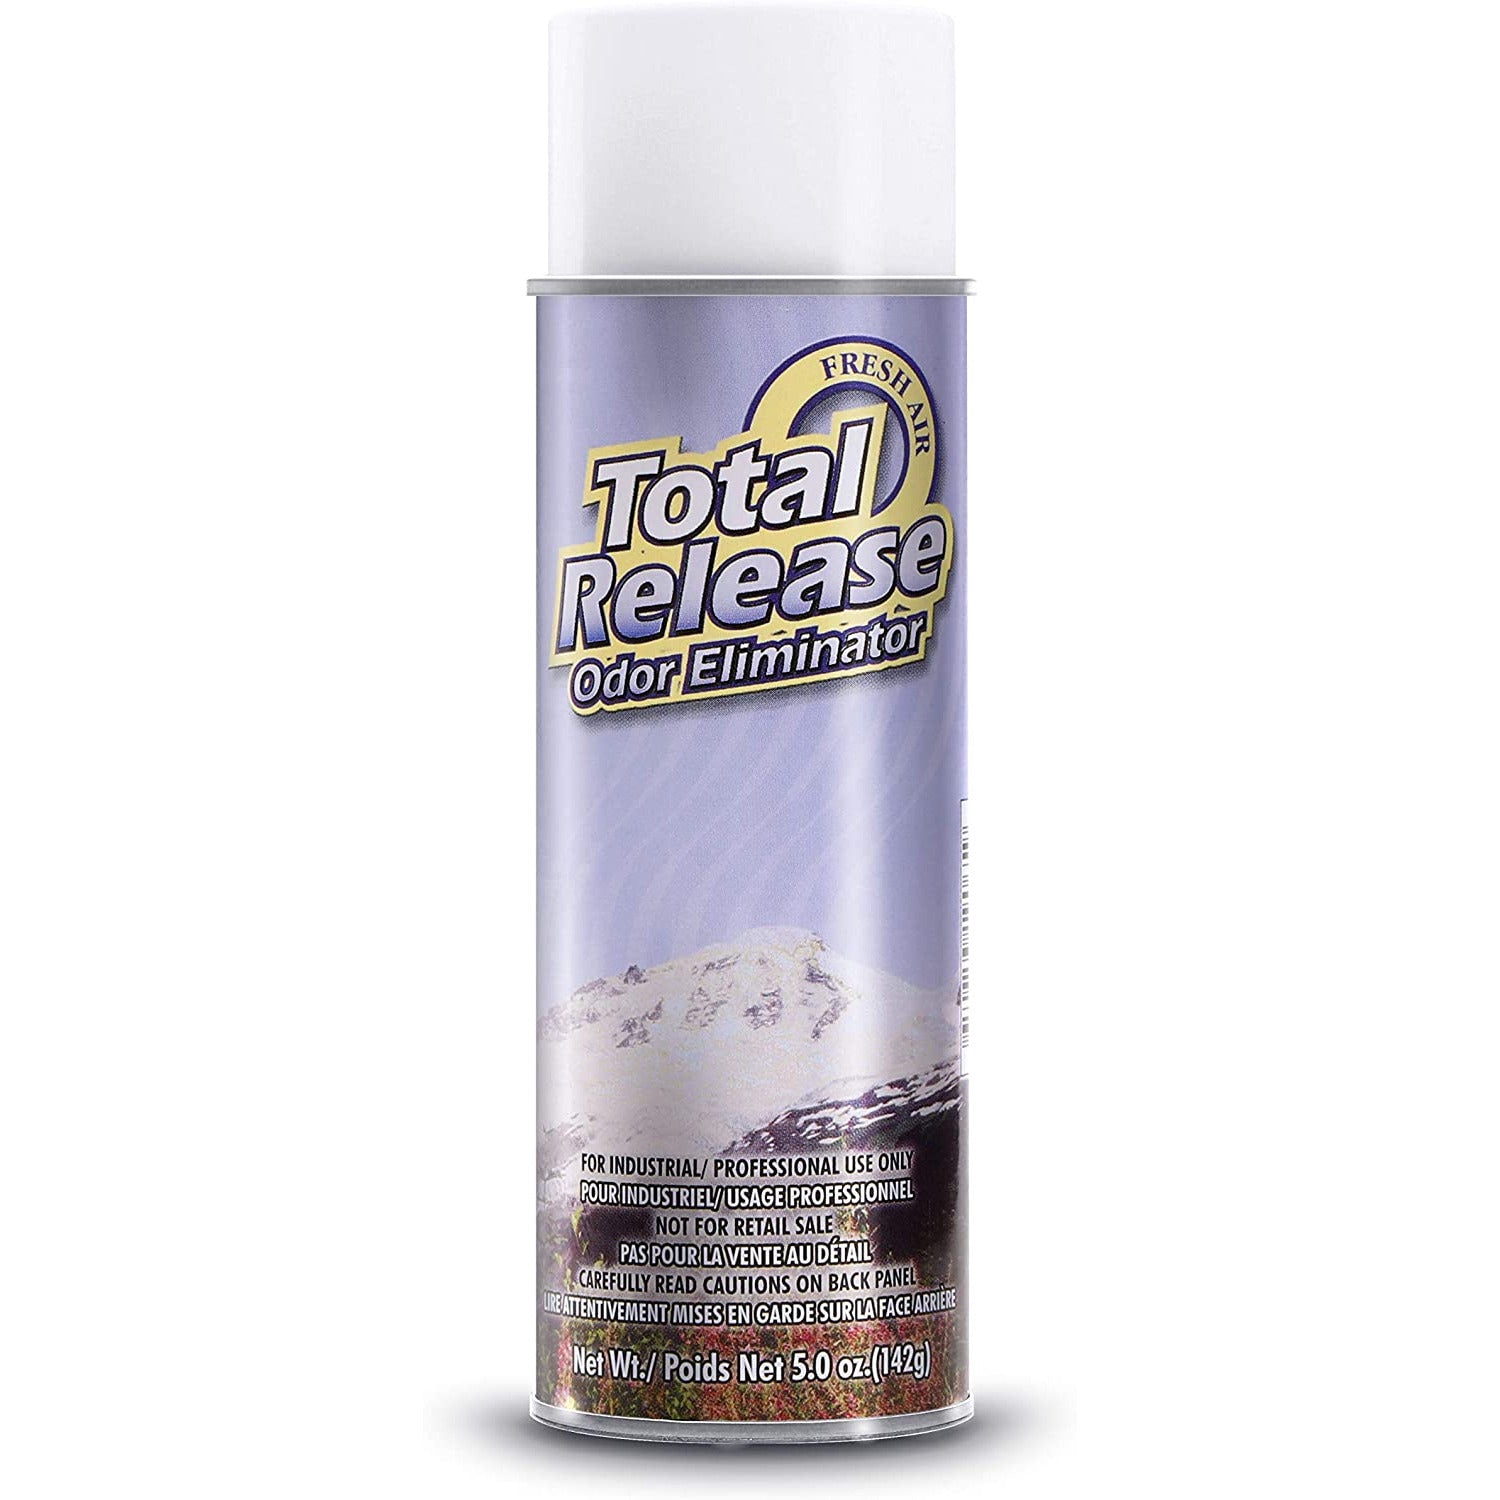 XCP HT-19065 CAR Products Hi-Tech Total Release Odor Eliminator (Fresh Air)